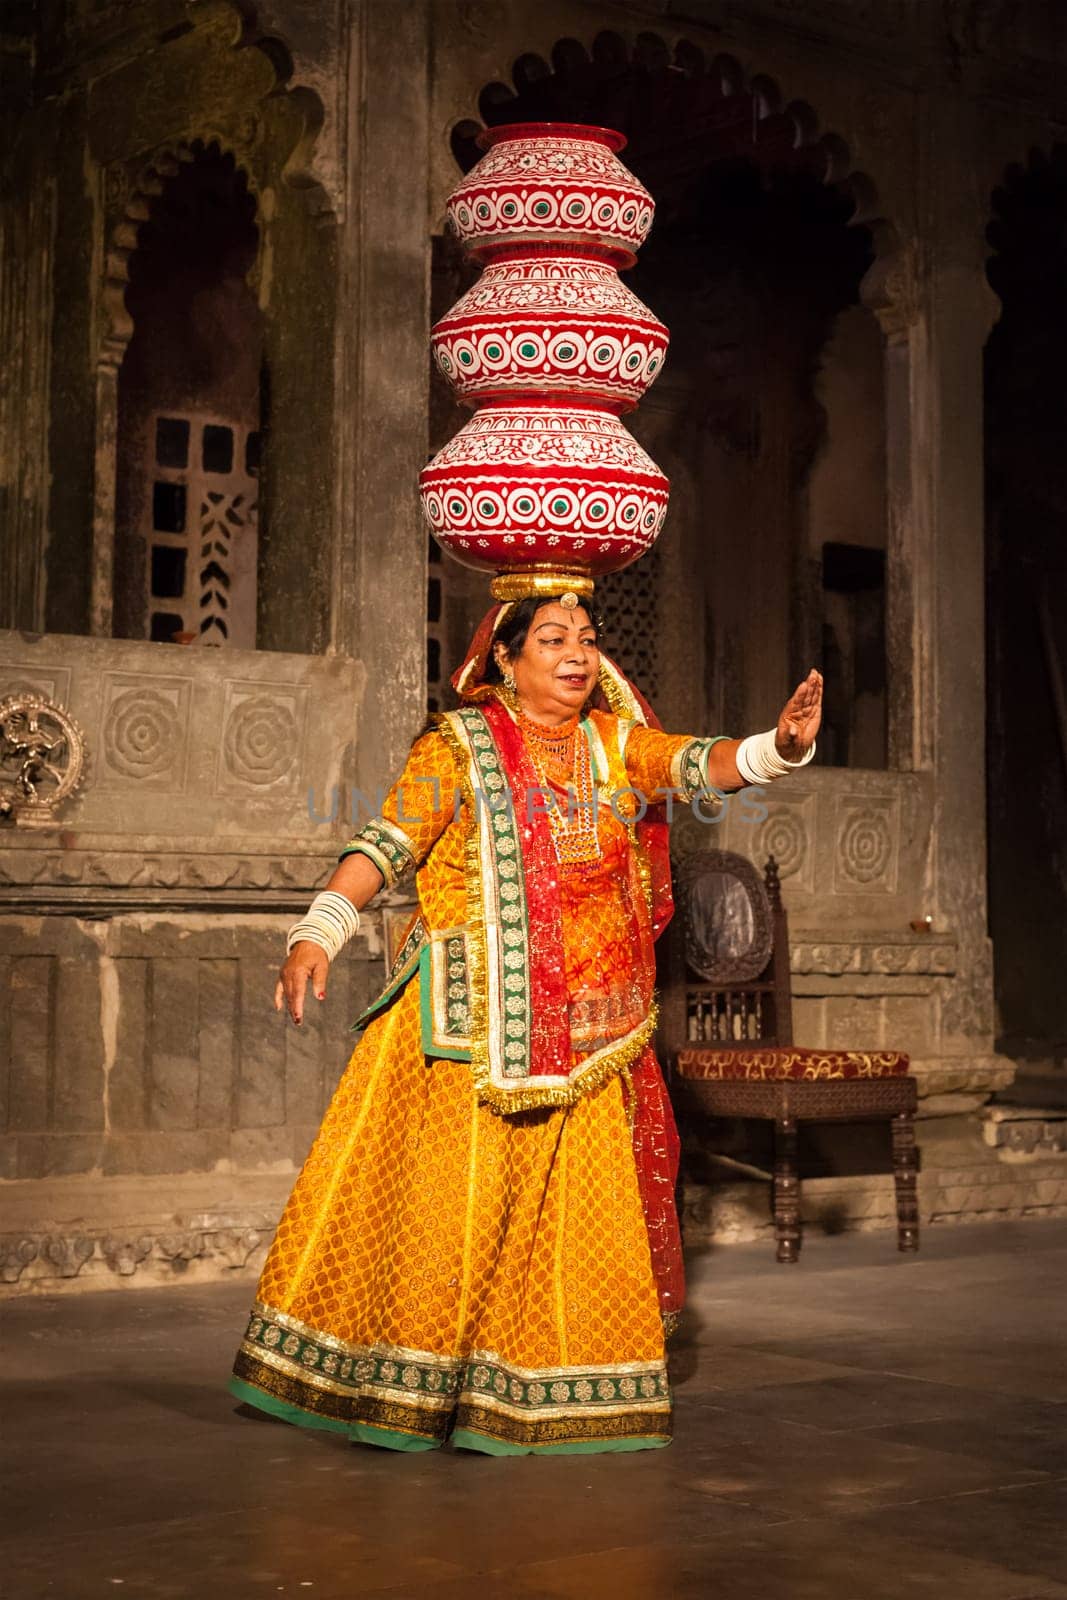 Bhavai dance of Rajasthan, India by dimol